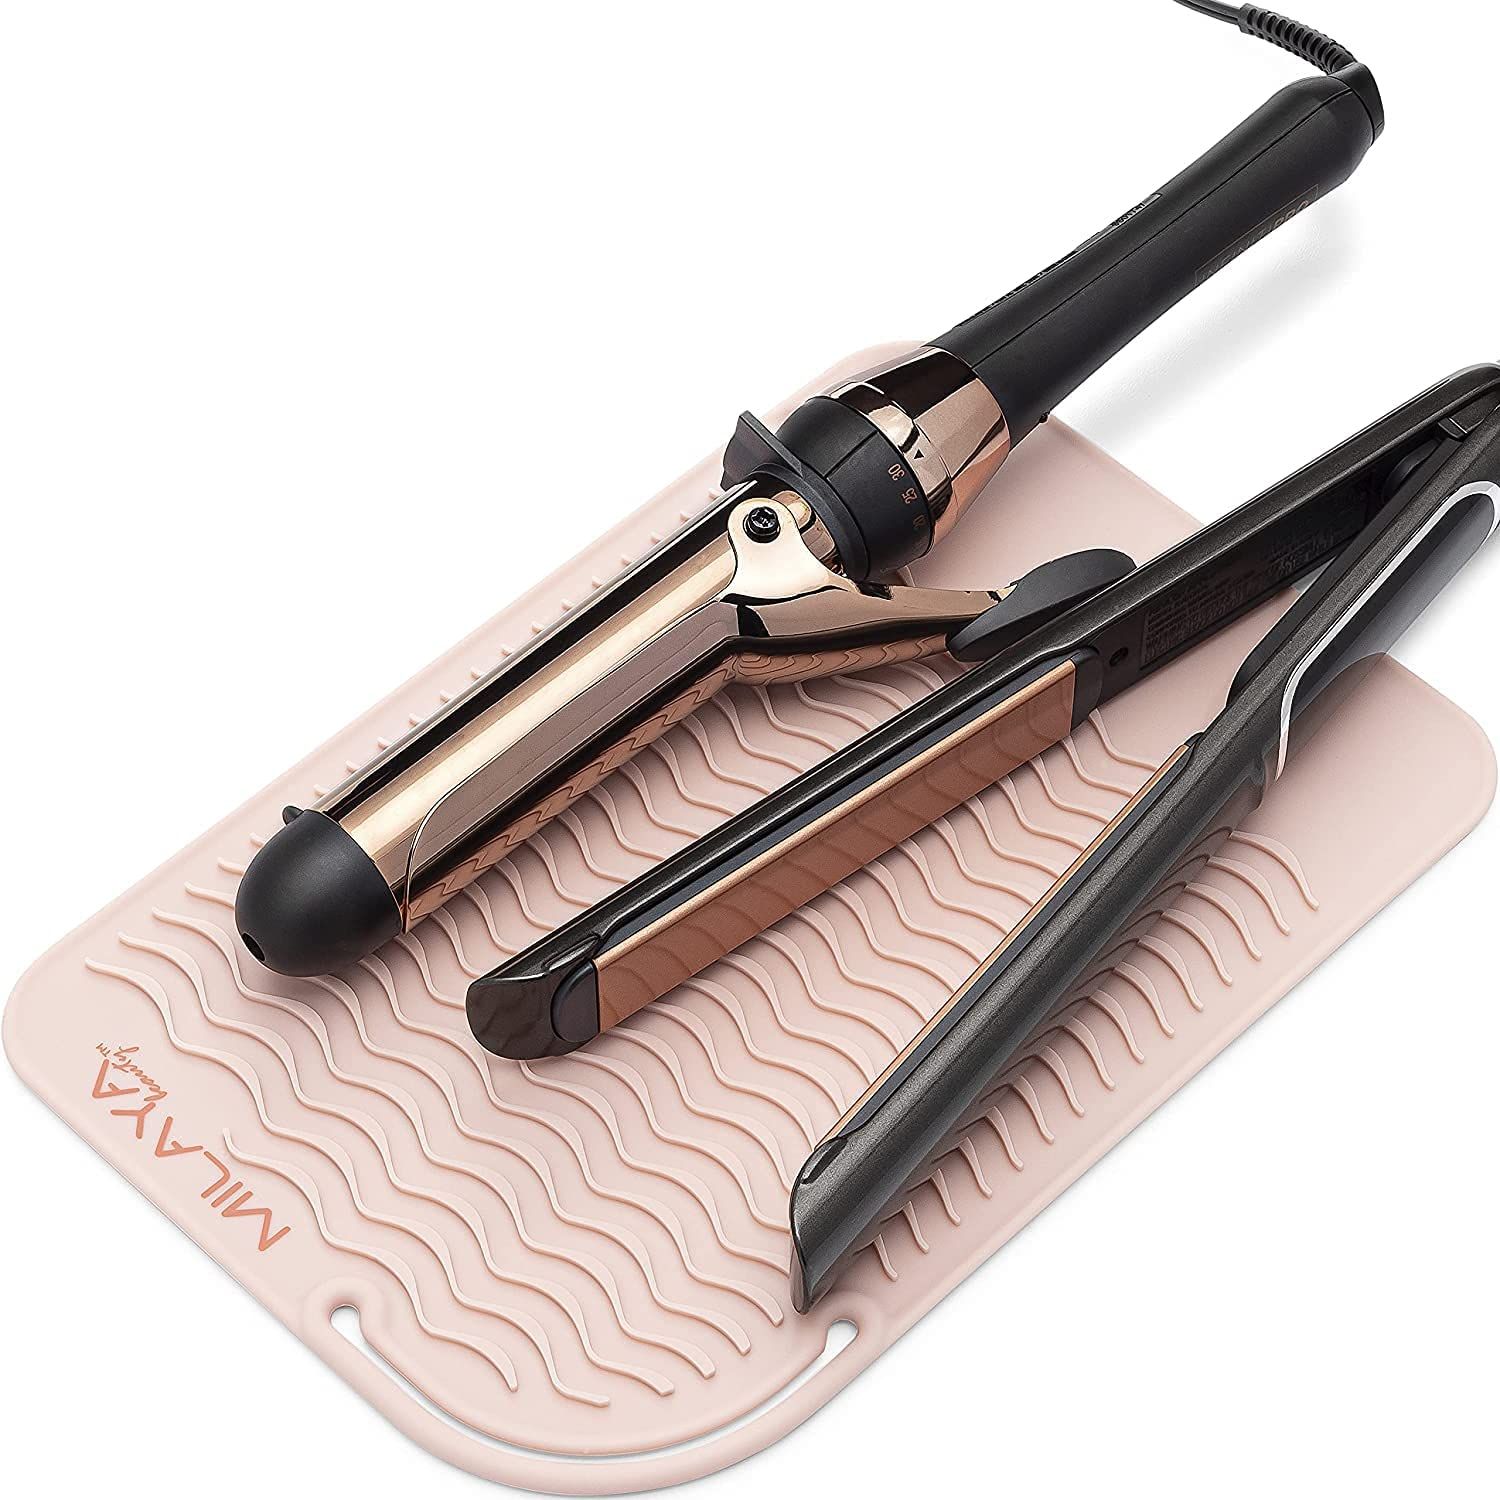 Heat Resistant Mat - Curling Iron Holder - Straightener pad - Flat Iron Holder - Silicone Mat for Hair Tools - Hot Tool Mat - Salon Tools - Hot Iron Holster - Vanity Mat - Vanity Accessories for Women | Amazon (US)